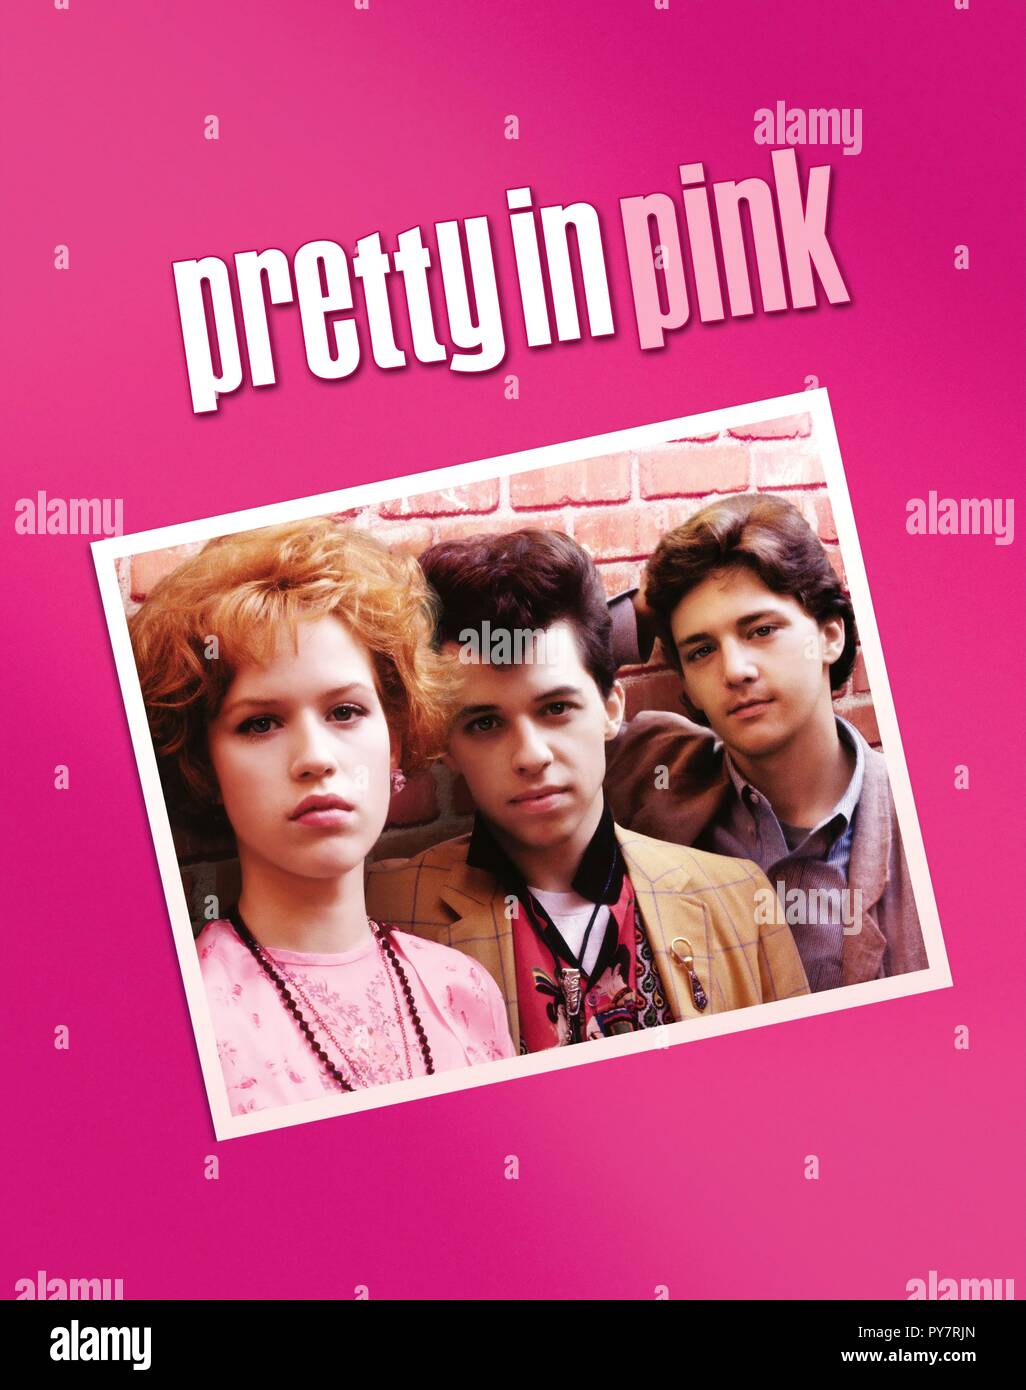 Original film title: PRETTY IN PINK. English title: PRETTY IN PINK. Year:  1986. Director: HOWARD DEUTCH. Credit: PARAMOUNT PICTURES / Album Stock  Photo - Alamy